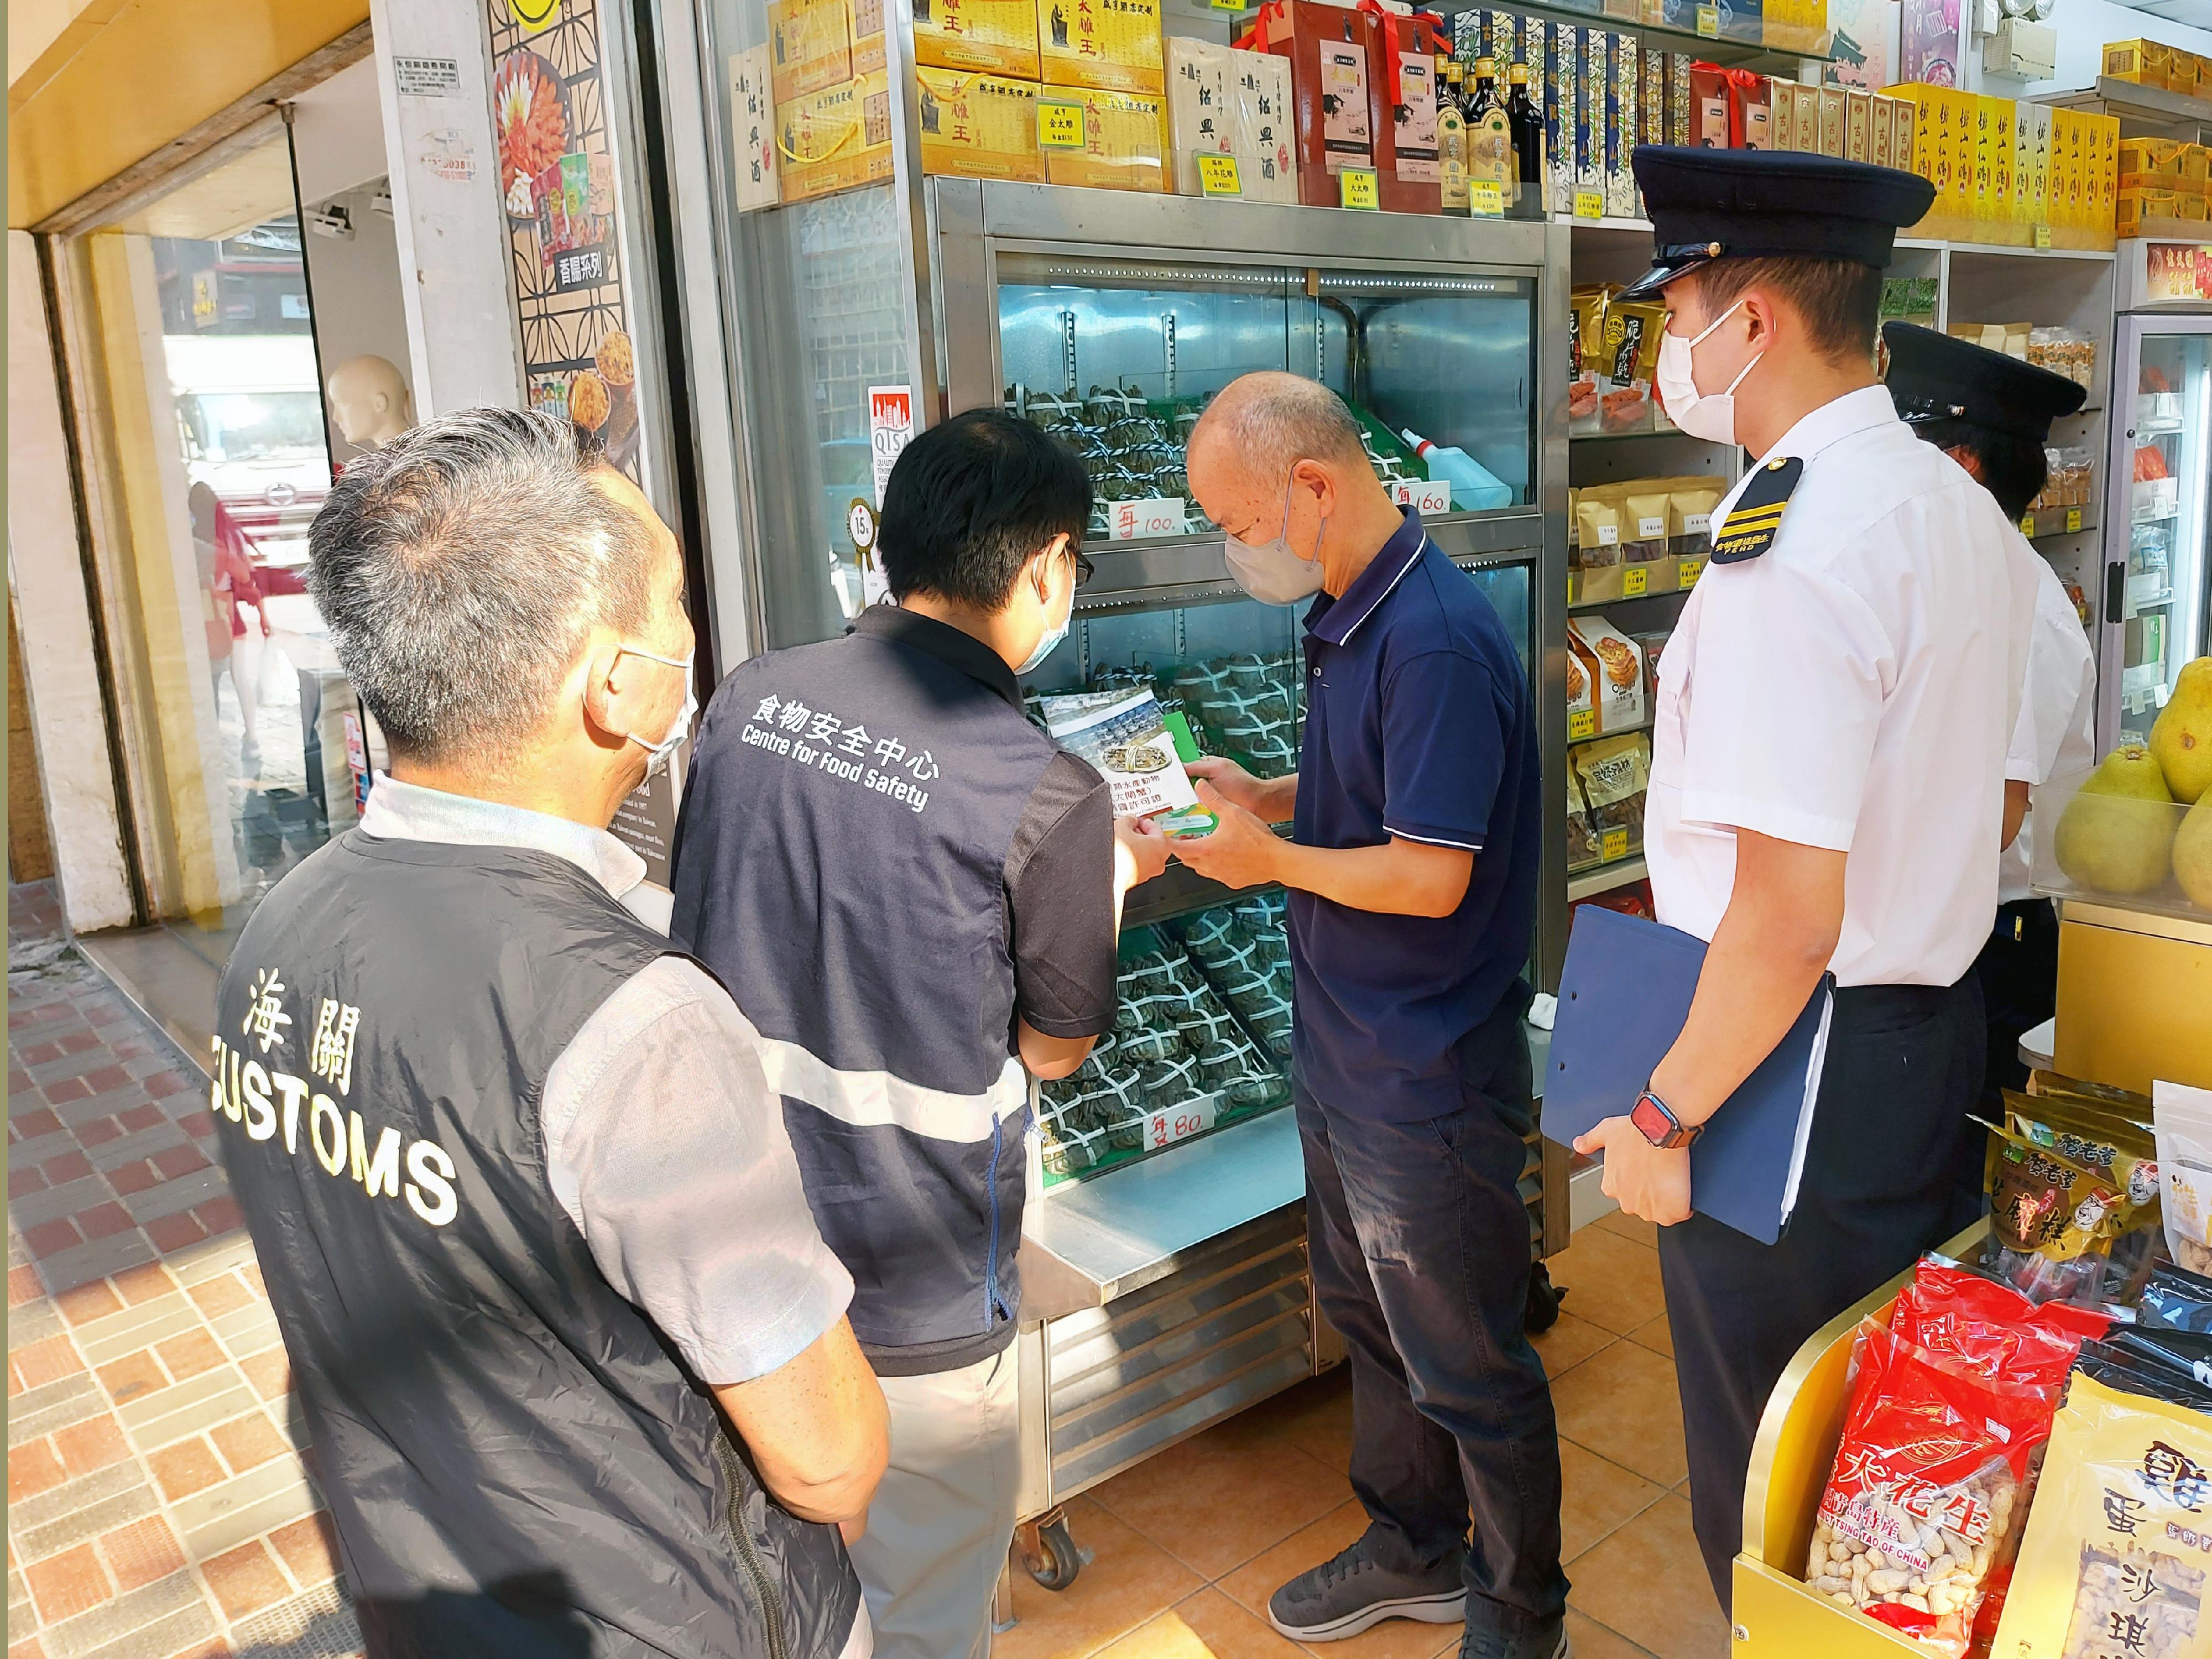 Hong Kong Customs and the Centre for Food Safety and the Environmental Hygiene Branch of the Food and Environmental Hygiene Department (FEHD) have been carrying out joint enforcement operations since last Thursday (September 15) to inspect hairy crab retail outlets in various districts, with the aim of protecting consumer rights and upholding food safety by ensuring hairy crabs on sale in the market comply with relevant stipulations and requirements under the laws. Photo shows Customs officers and FEHD officers inspecting a retail shop selling hairy crabs and distributing relevant promotional leaflets.